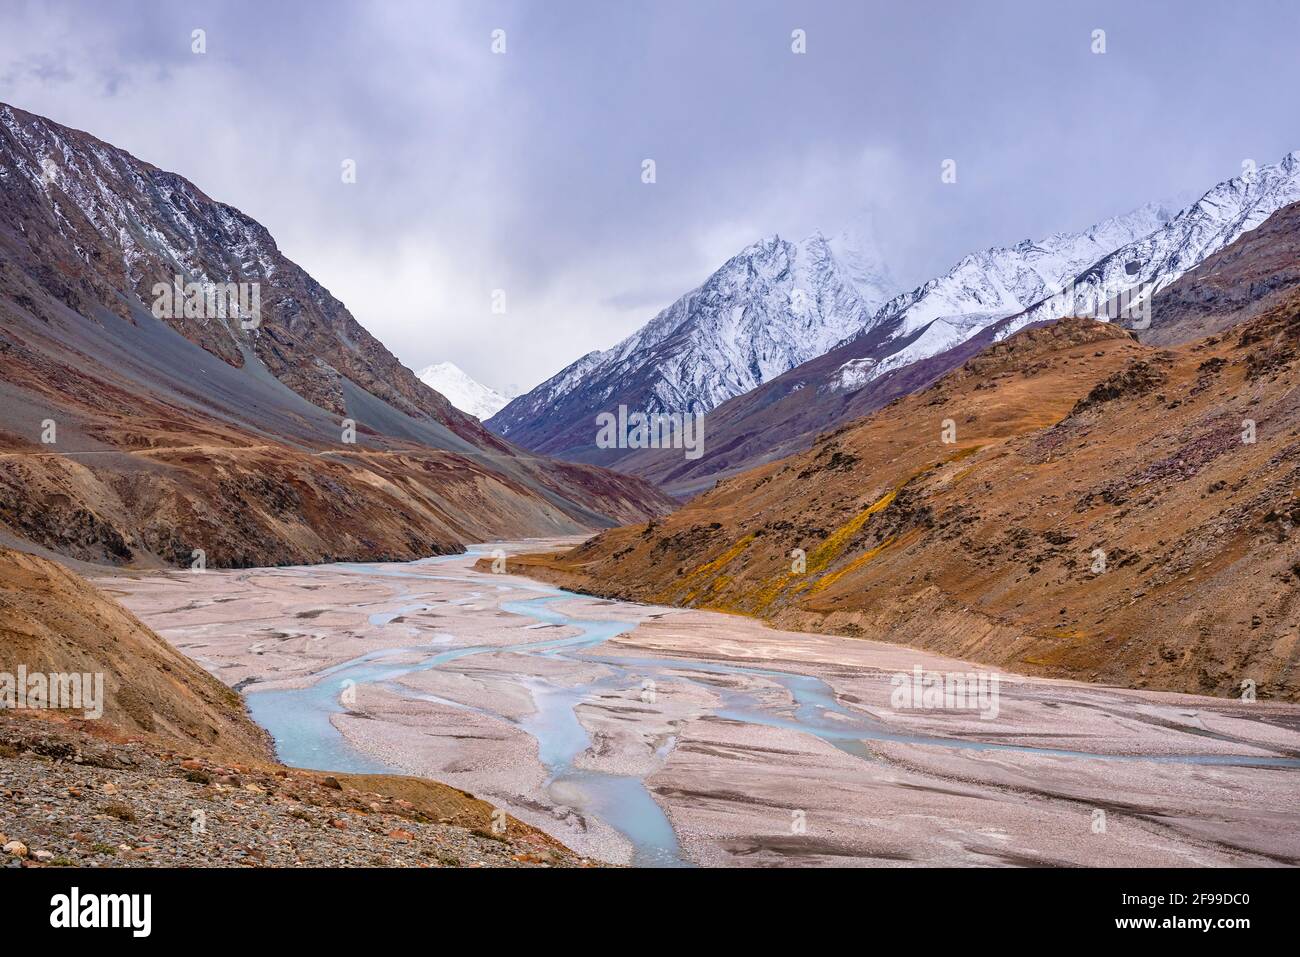 Landscape of valley of  Chandra river which confluence with bhaga river to form Chenab river in Lahaul Spiti.  Spiti is a cold desert mountain valley Stock Photo